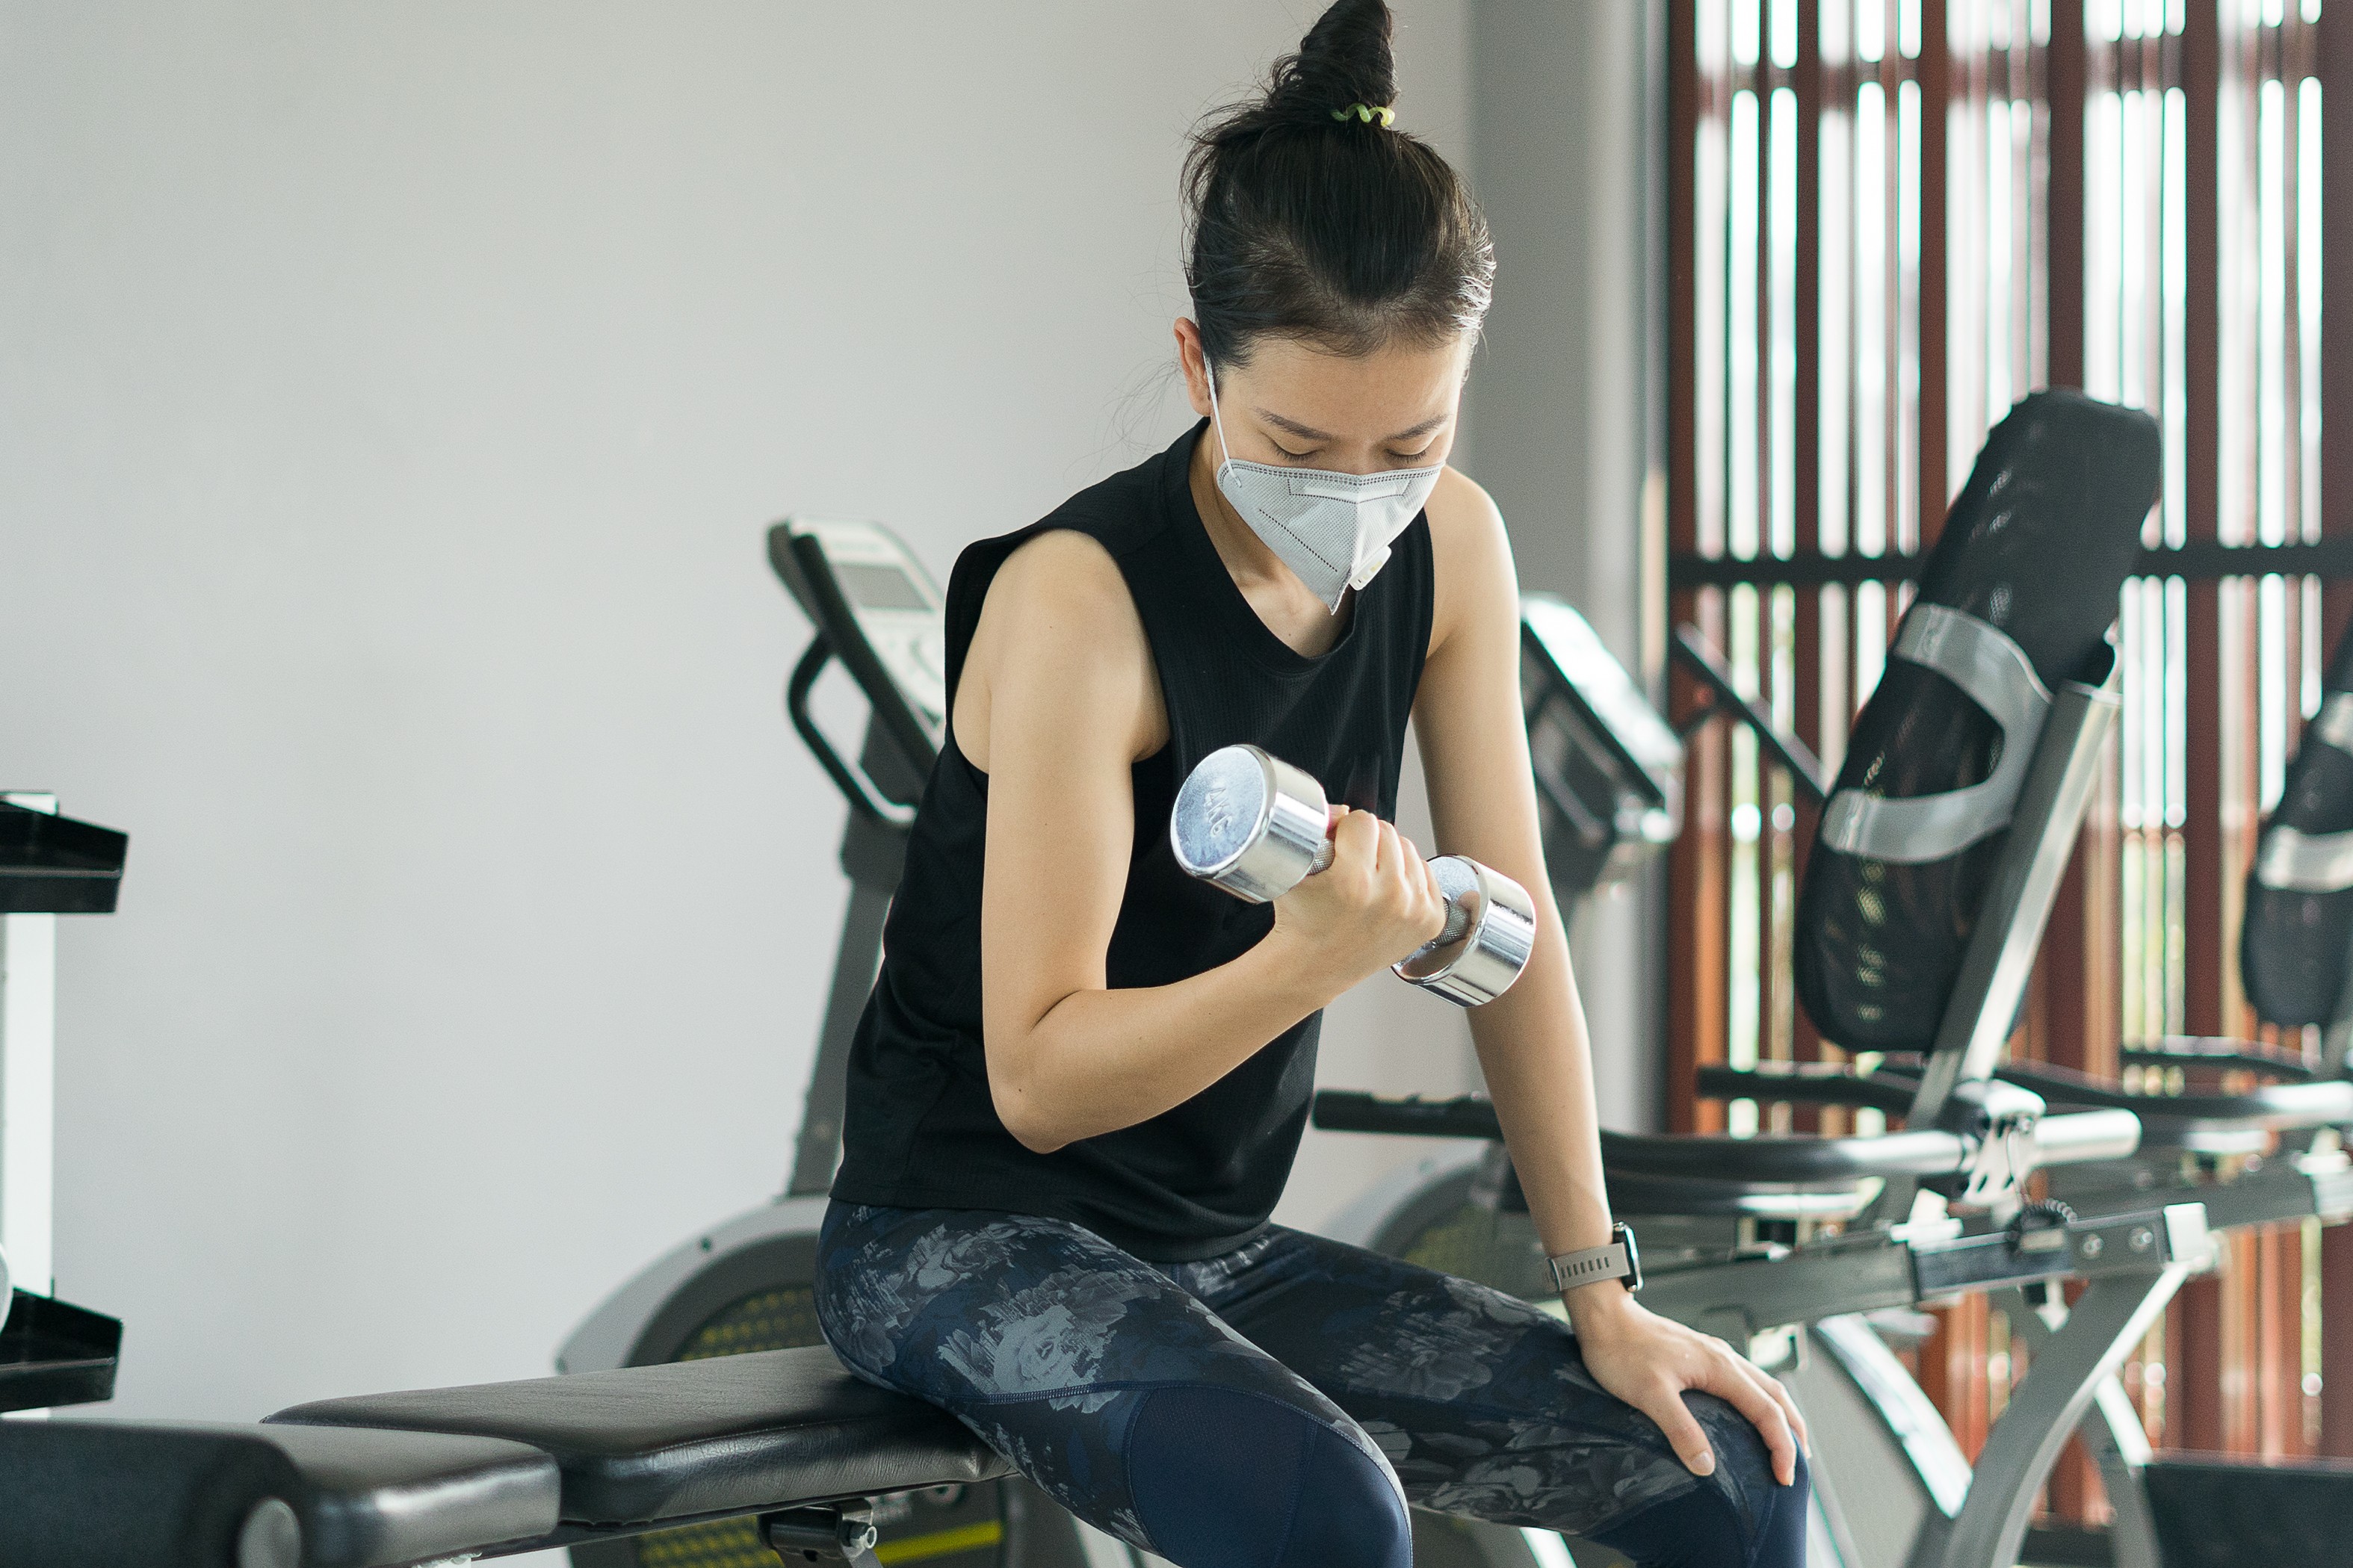 Working out in a mask is not ideal, a doctor says. Photo: Shutterstock